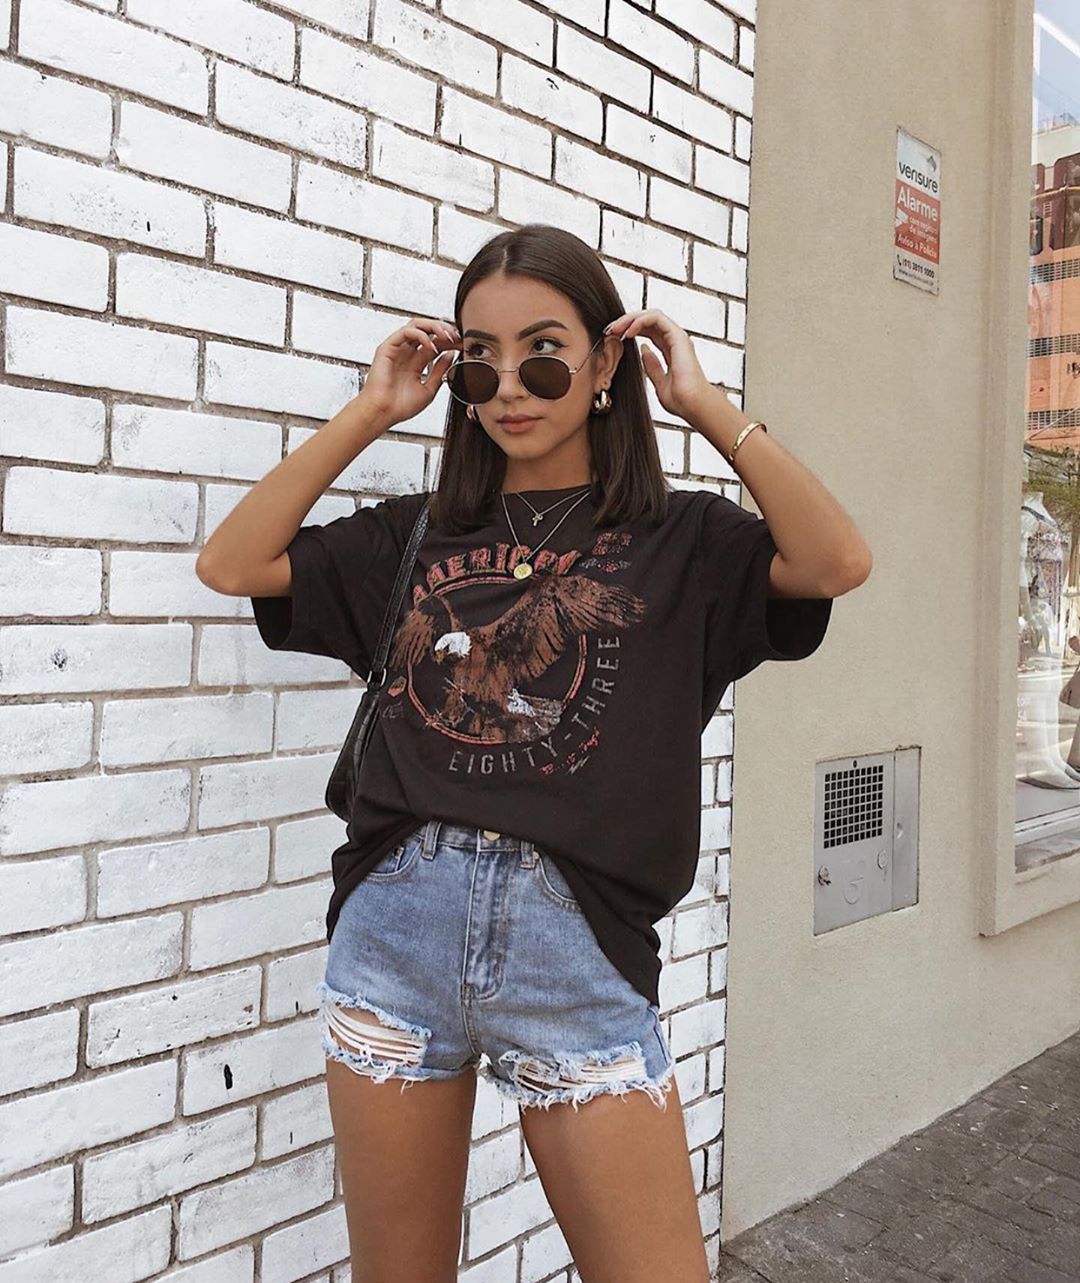 How to Wear Ripped Jean Shorts: Top 13 Stylish Outfit Ideas for Women